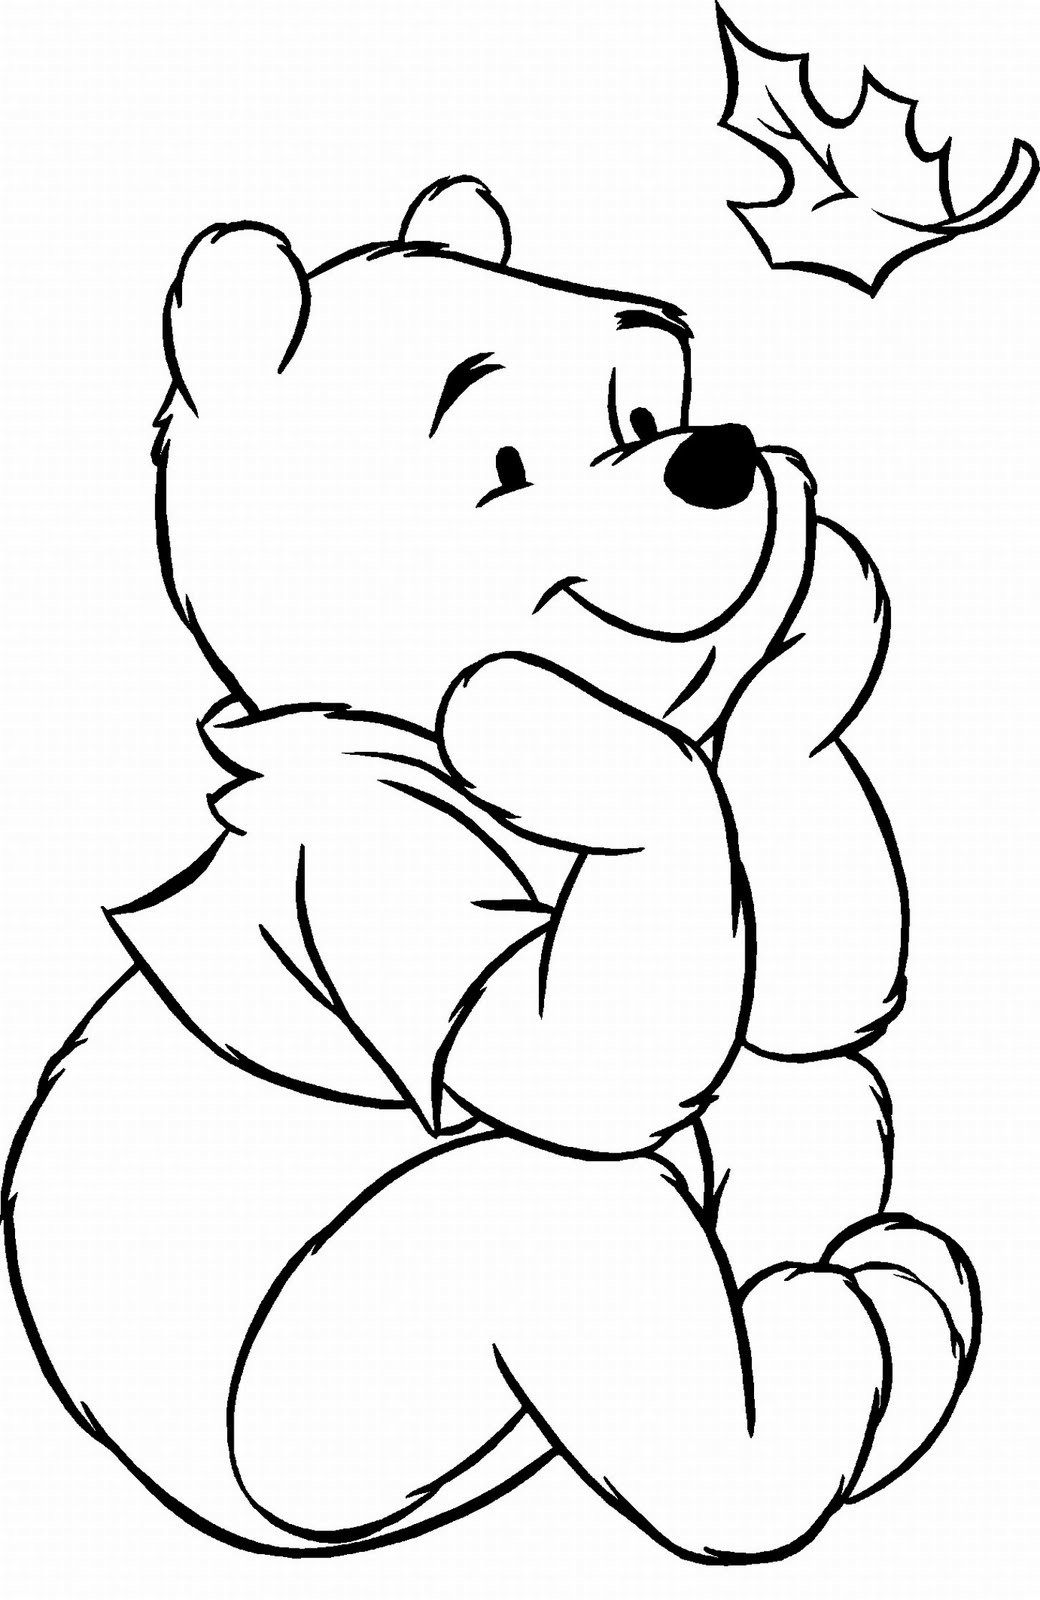 Coloring Pages Of Disney Characters
 Disney Thanksgiving Coloring Pages Winnie The Pooh